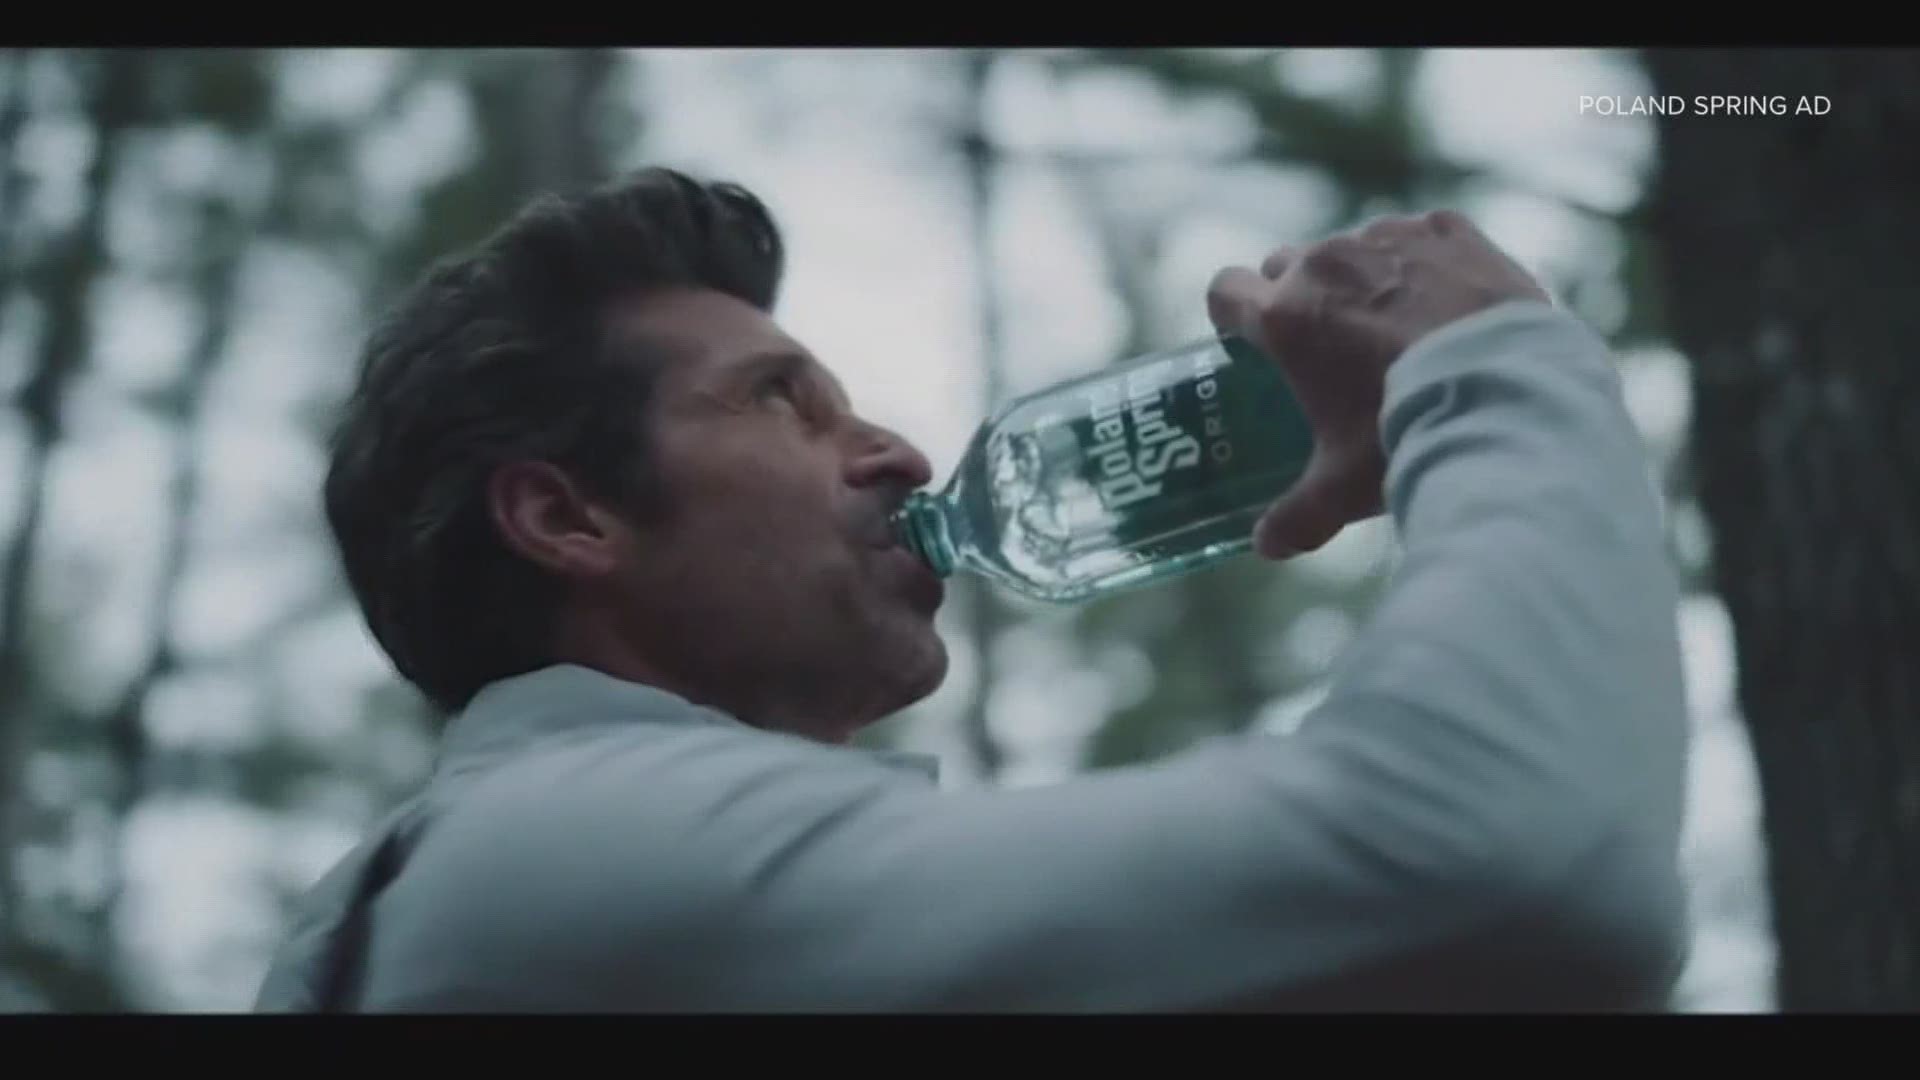 Maine's Patrick Dempsey is collaborating with Poland Spring water on a new ad campaign.